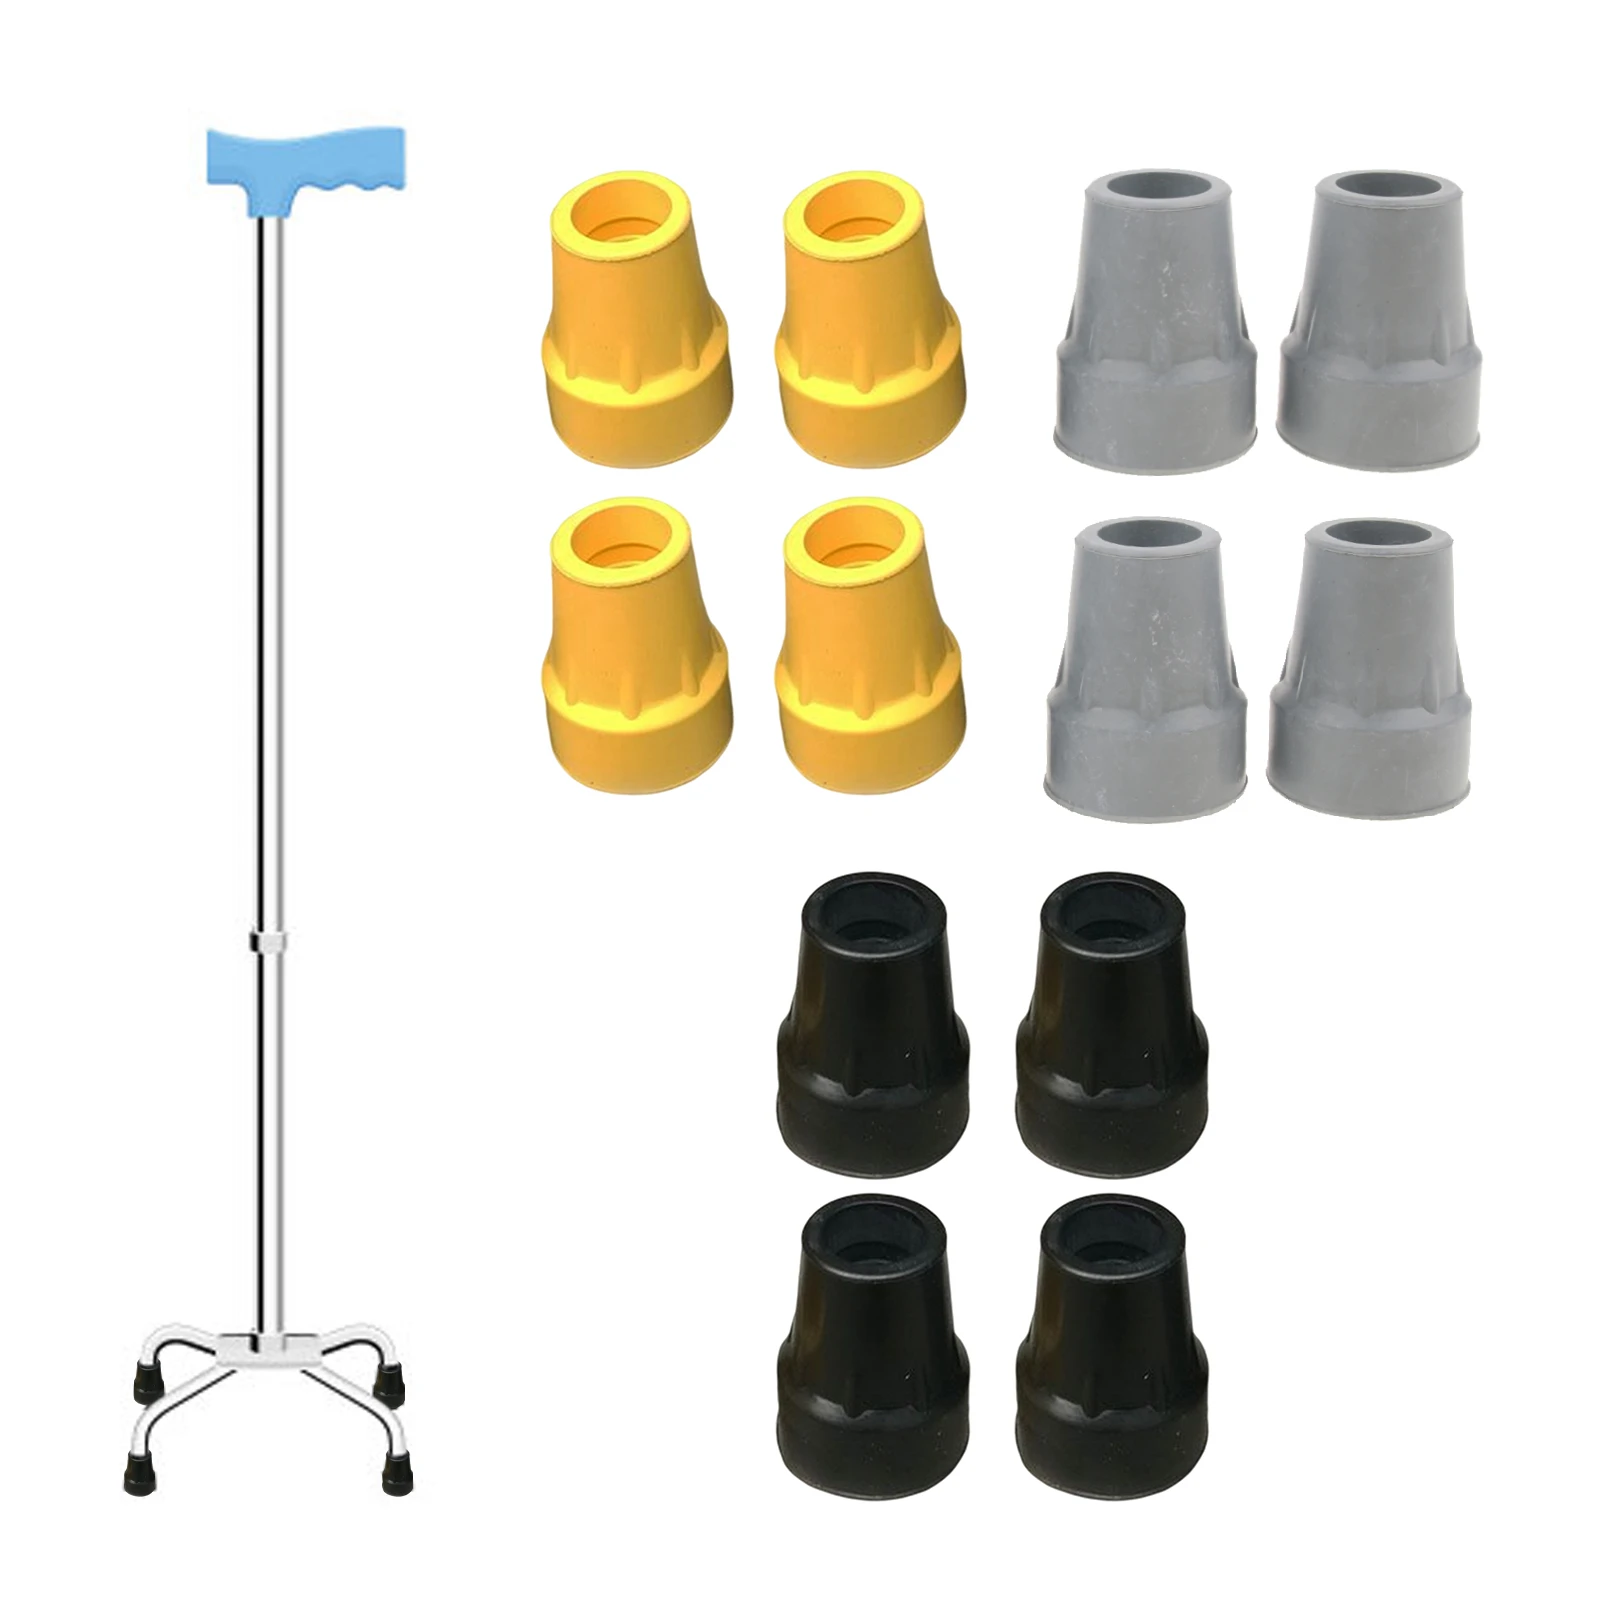 

4 PCS 22mm Trekking Pole Rubber Silicone Cap Hammers Hiking Walking Stick Cane Tips Crutch Ferrules Feet Cover Outdoor Sports